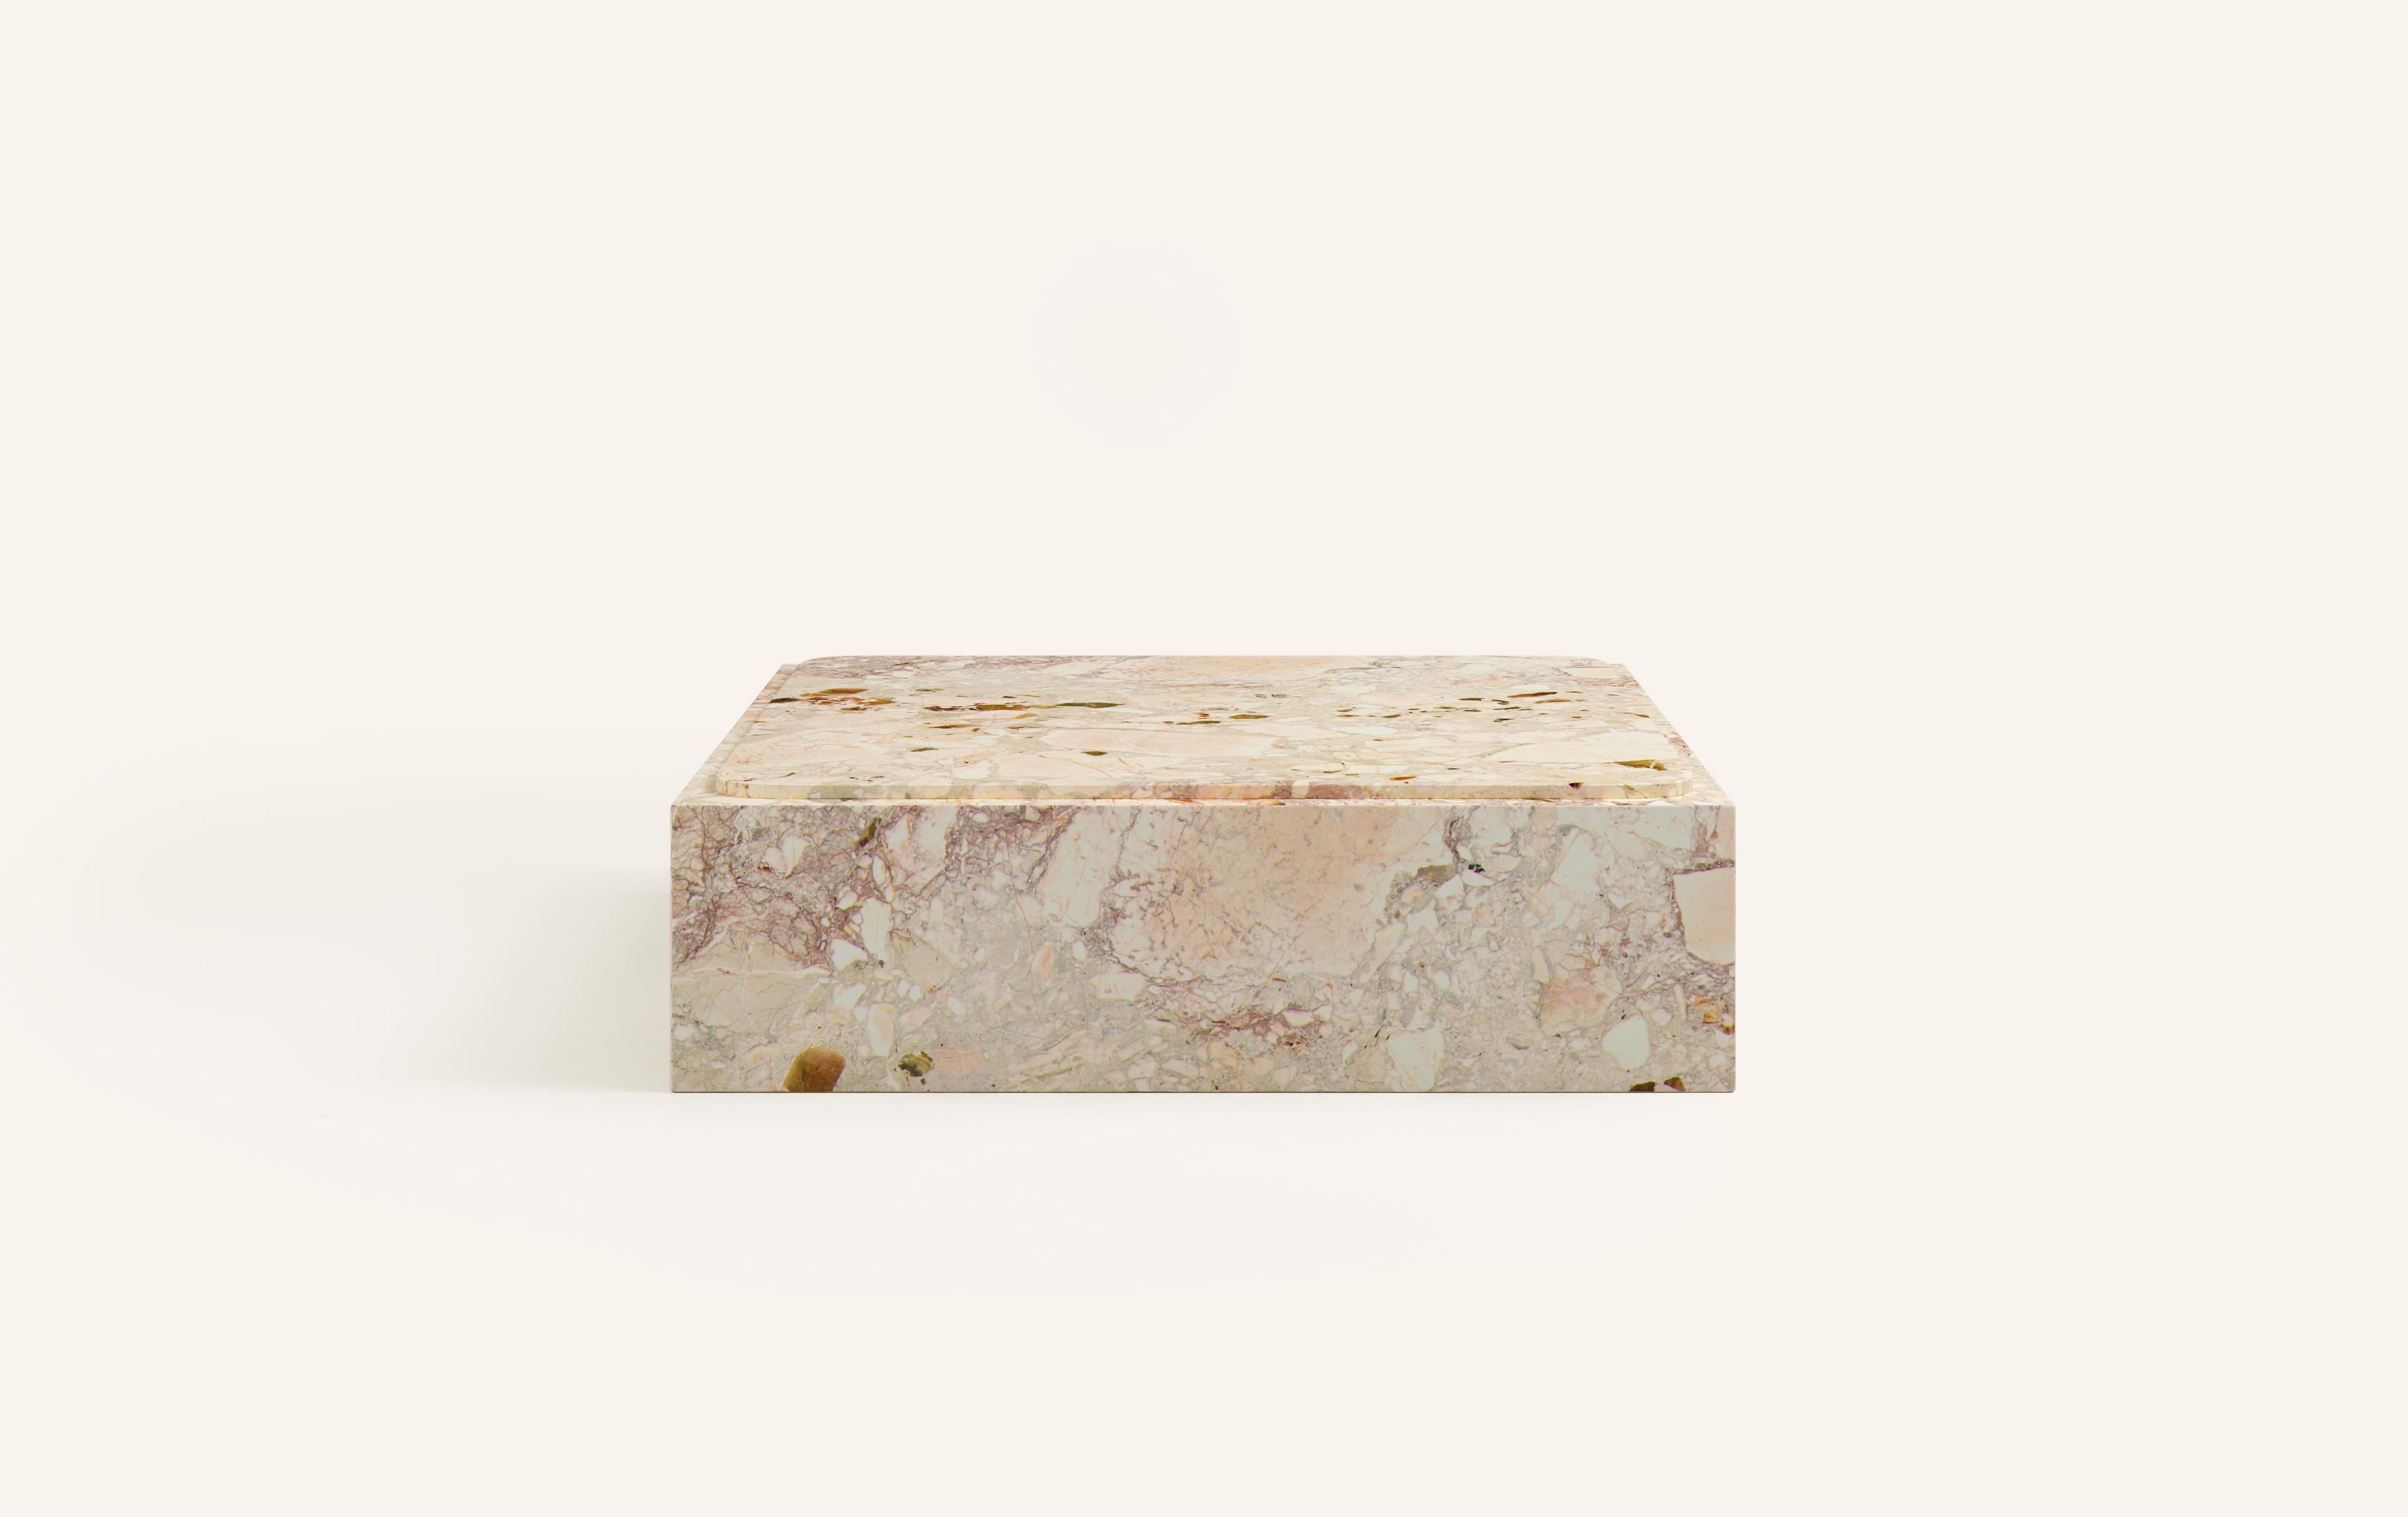 MONOLITHIC FORMS SOFTENED BY GENTLE EDGES. WITH ITS BOLD MARBLE PATTERNS CUBO IS AS VERSATILE AS IT IS STRIKING.

DIMENSIONS:
60”L x 60”W x 13”H: 
- 3/4